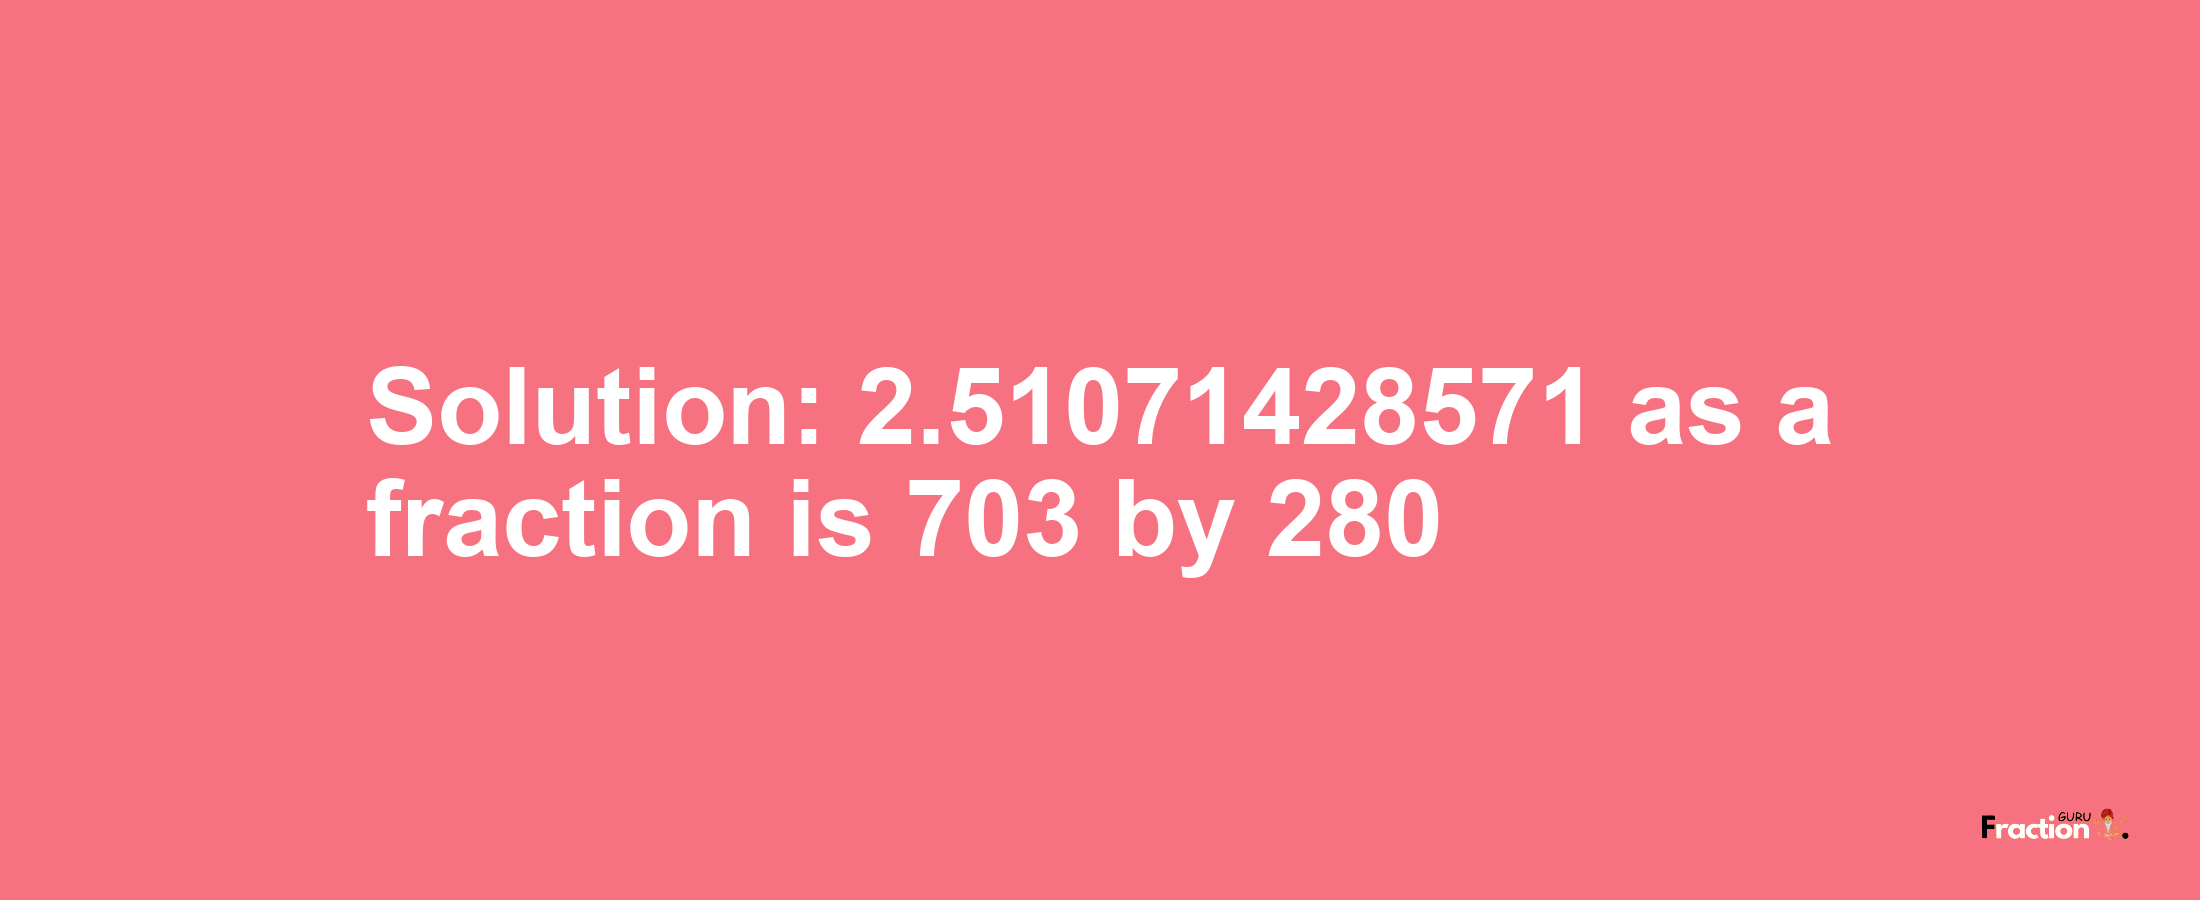 Solution:2.51071428571 as a fraction is 703/280